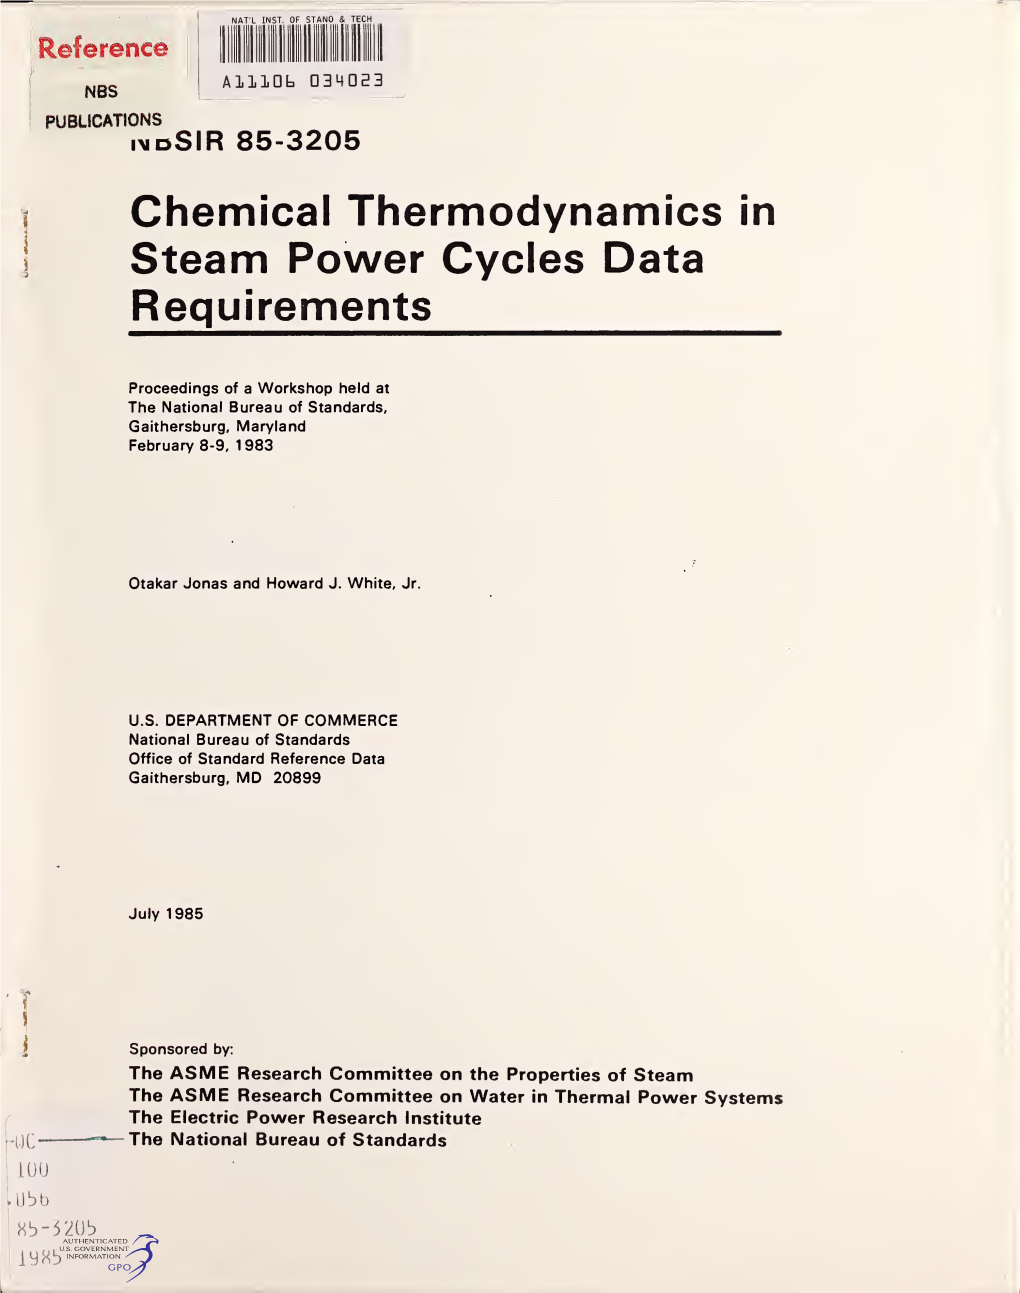 Chemical Thermodynamics in Steam Power Cycles Data Requirements